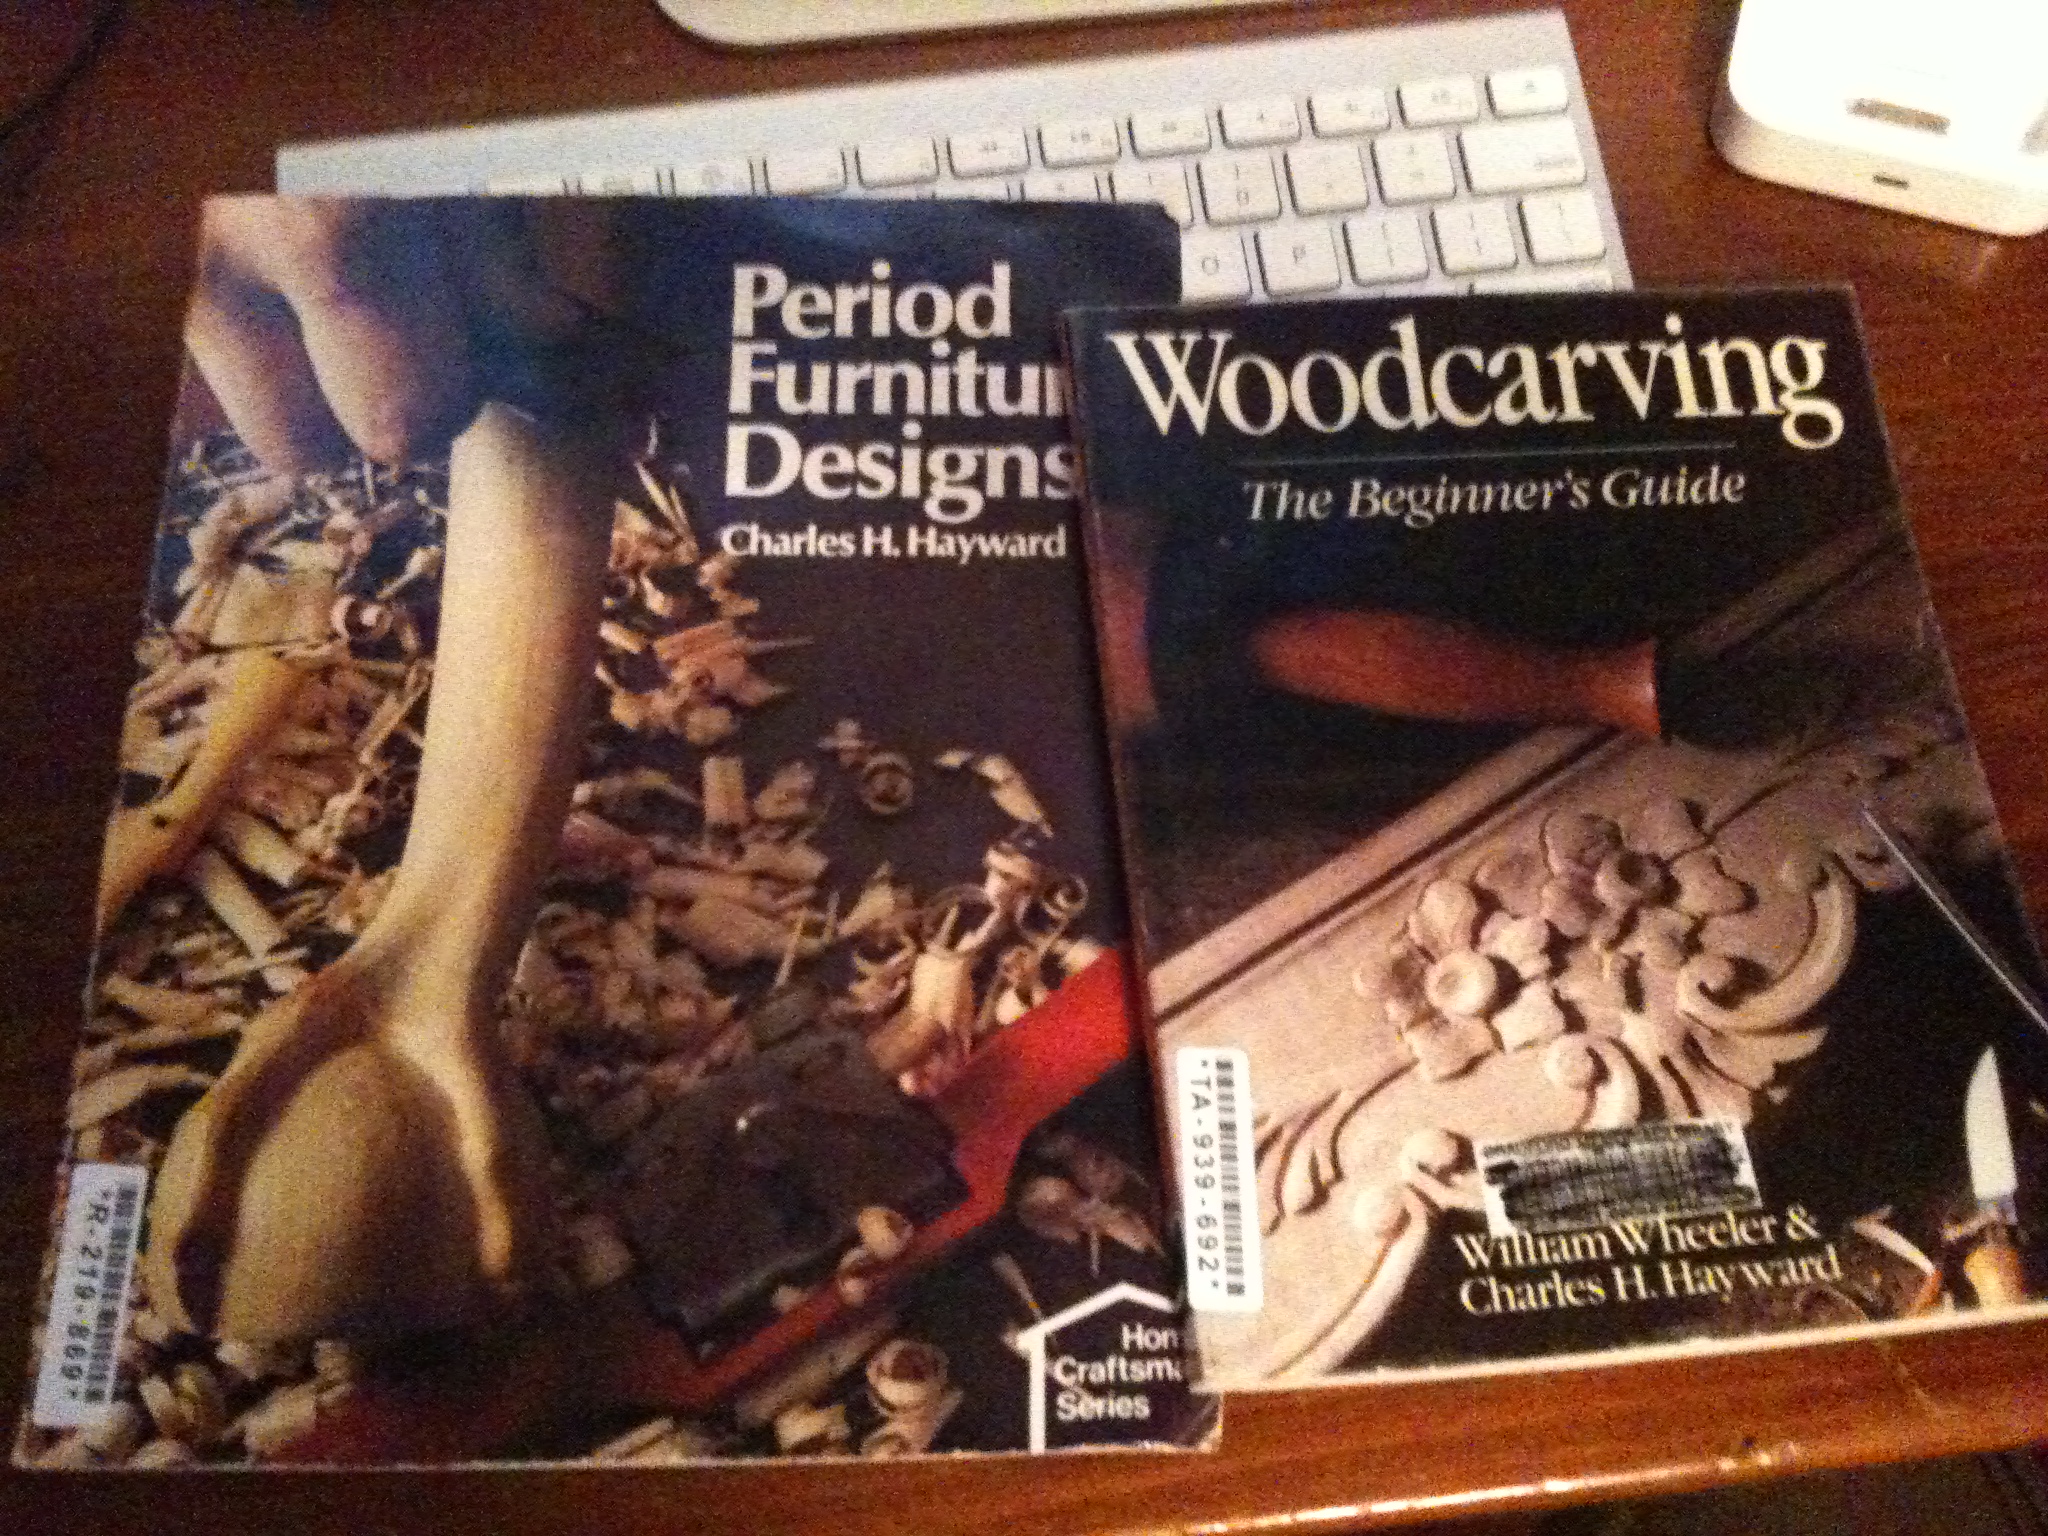 already have his practical woodworking and woodworking joints titles